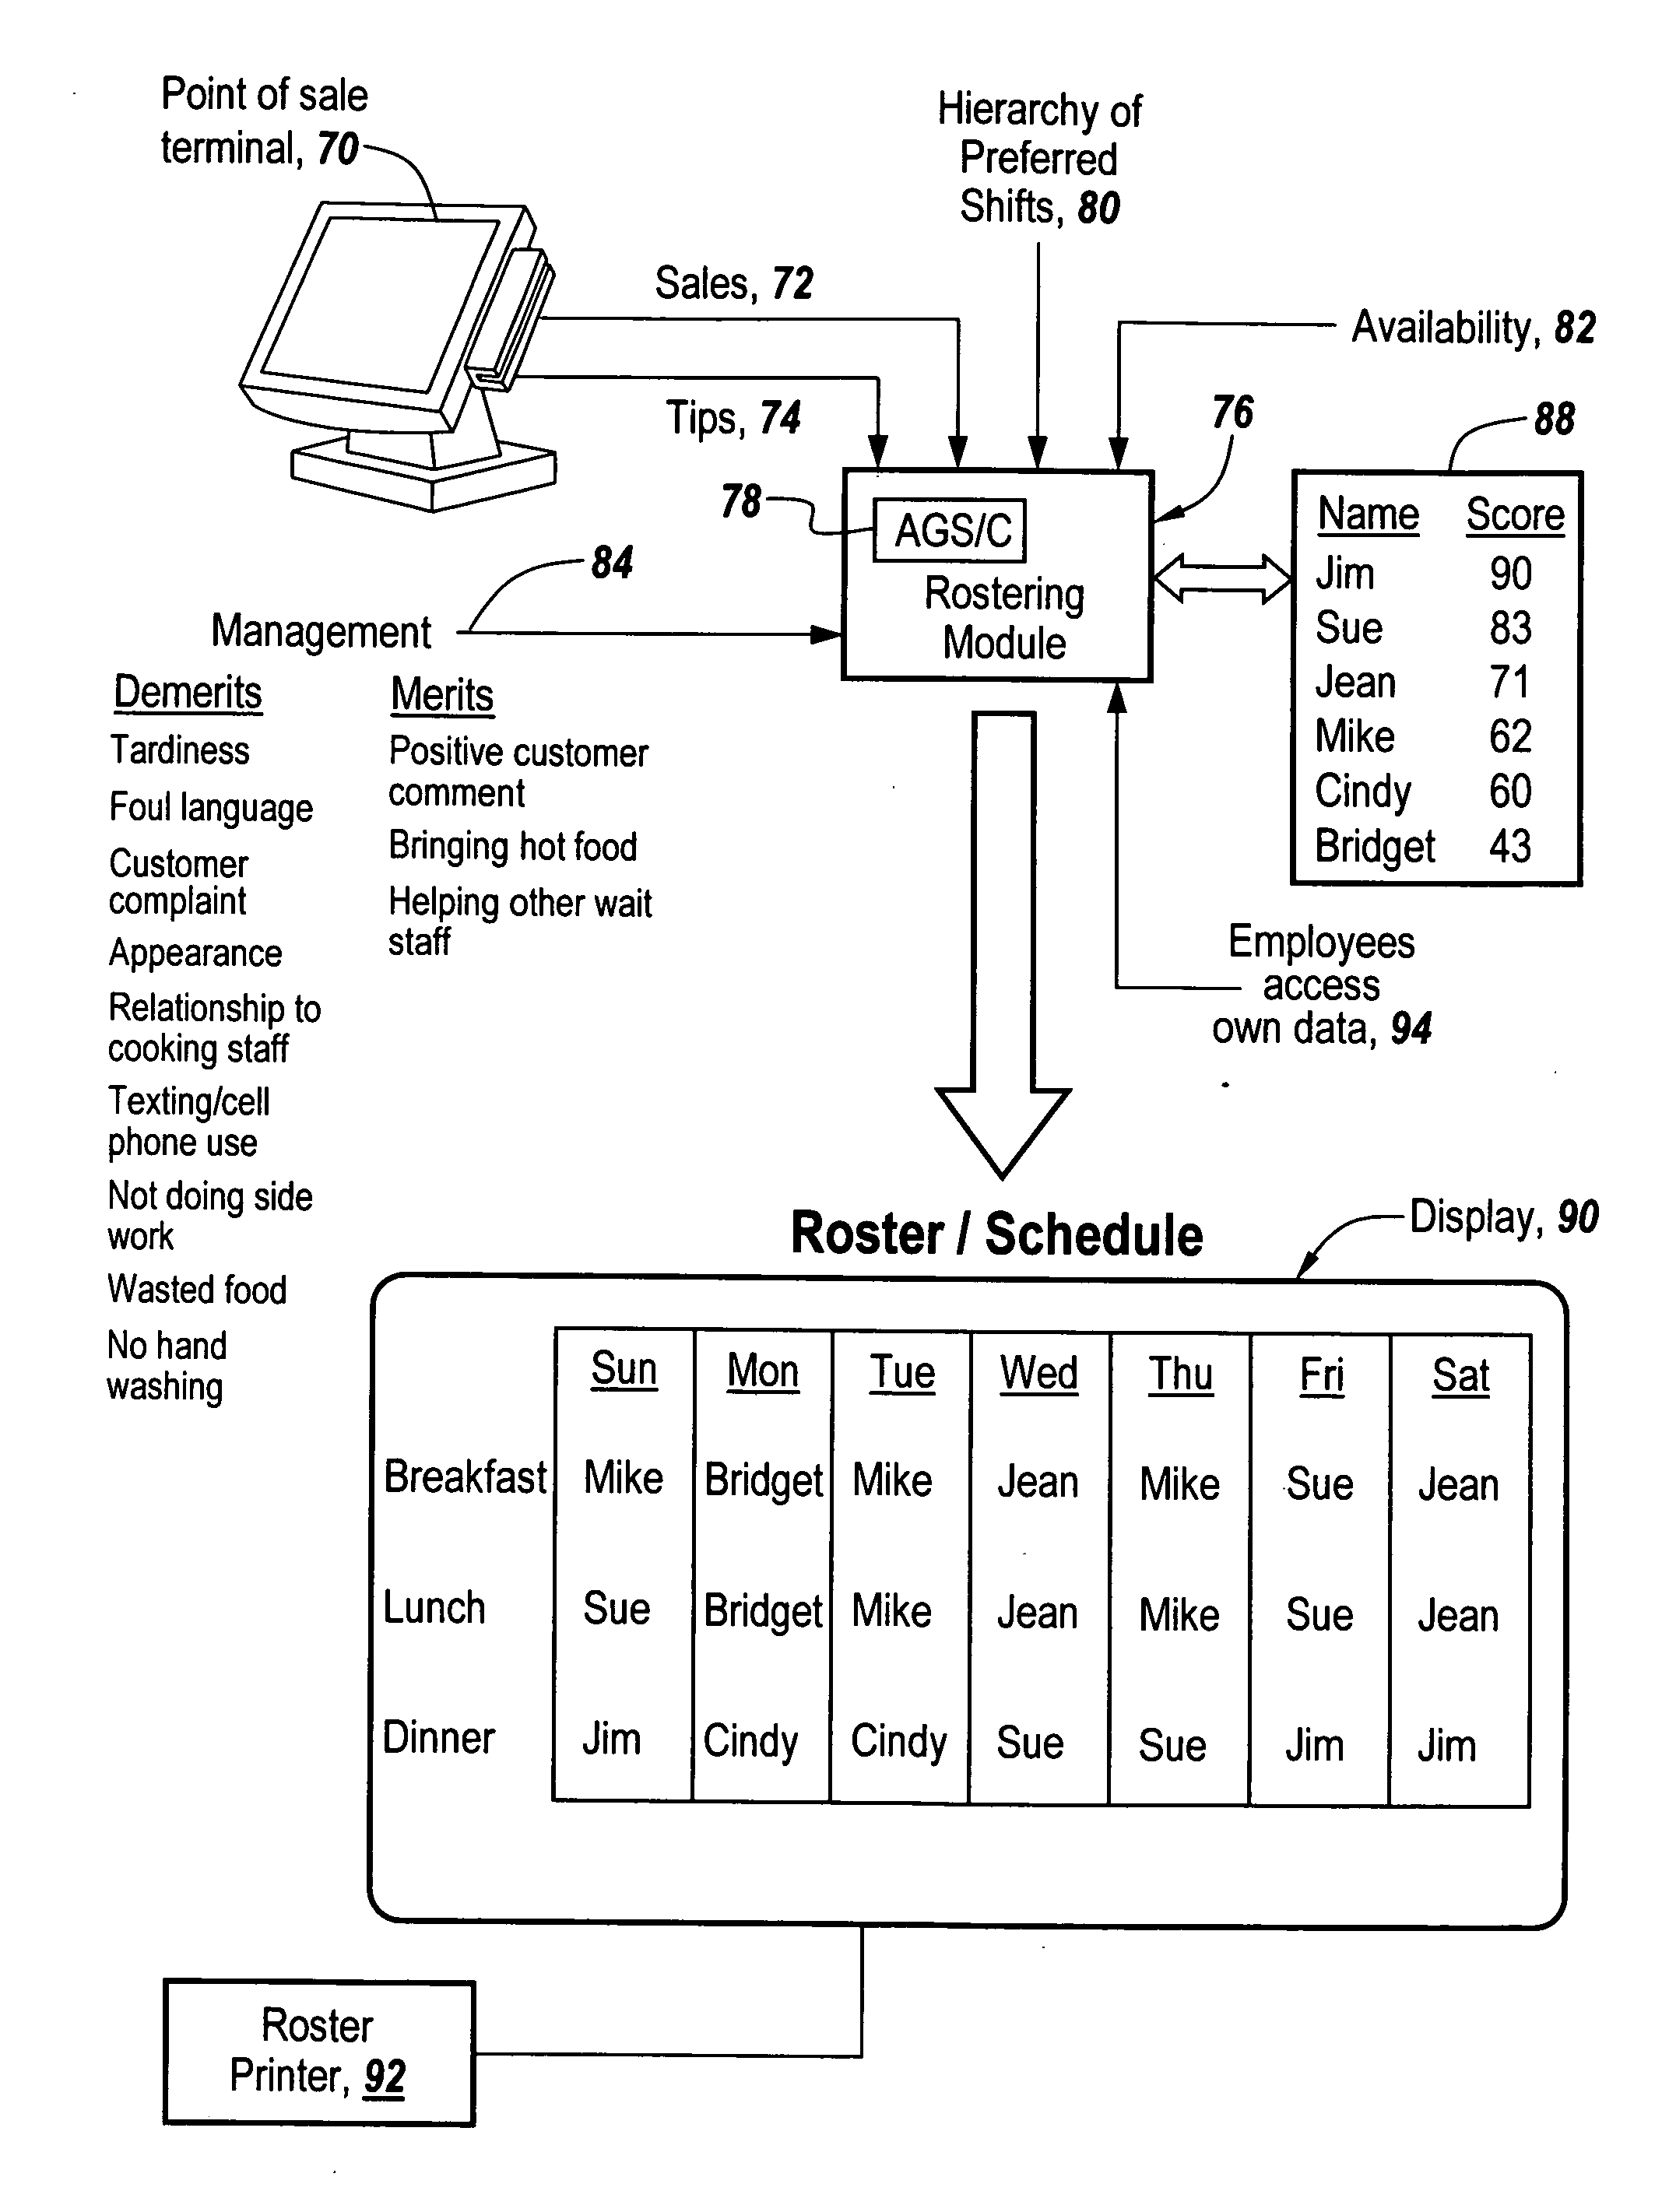 Apparatus for scheduling staff based on performance